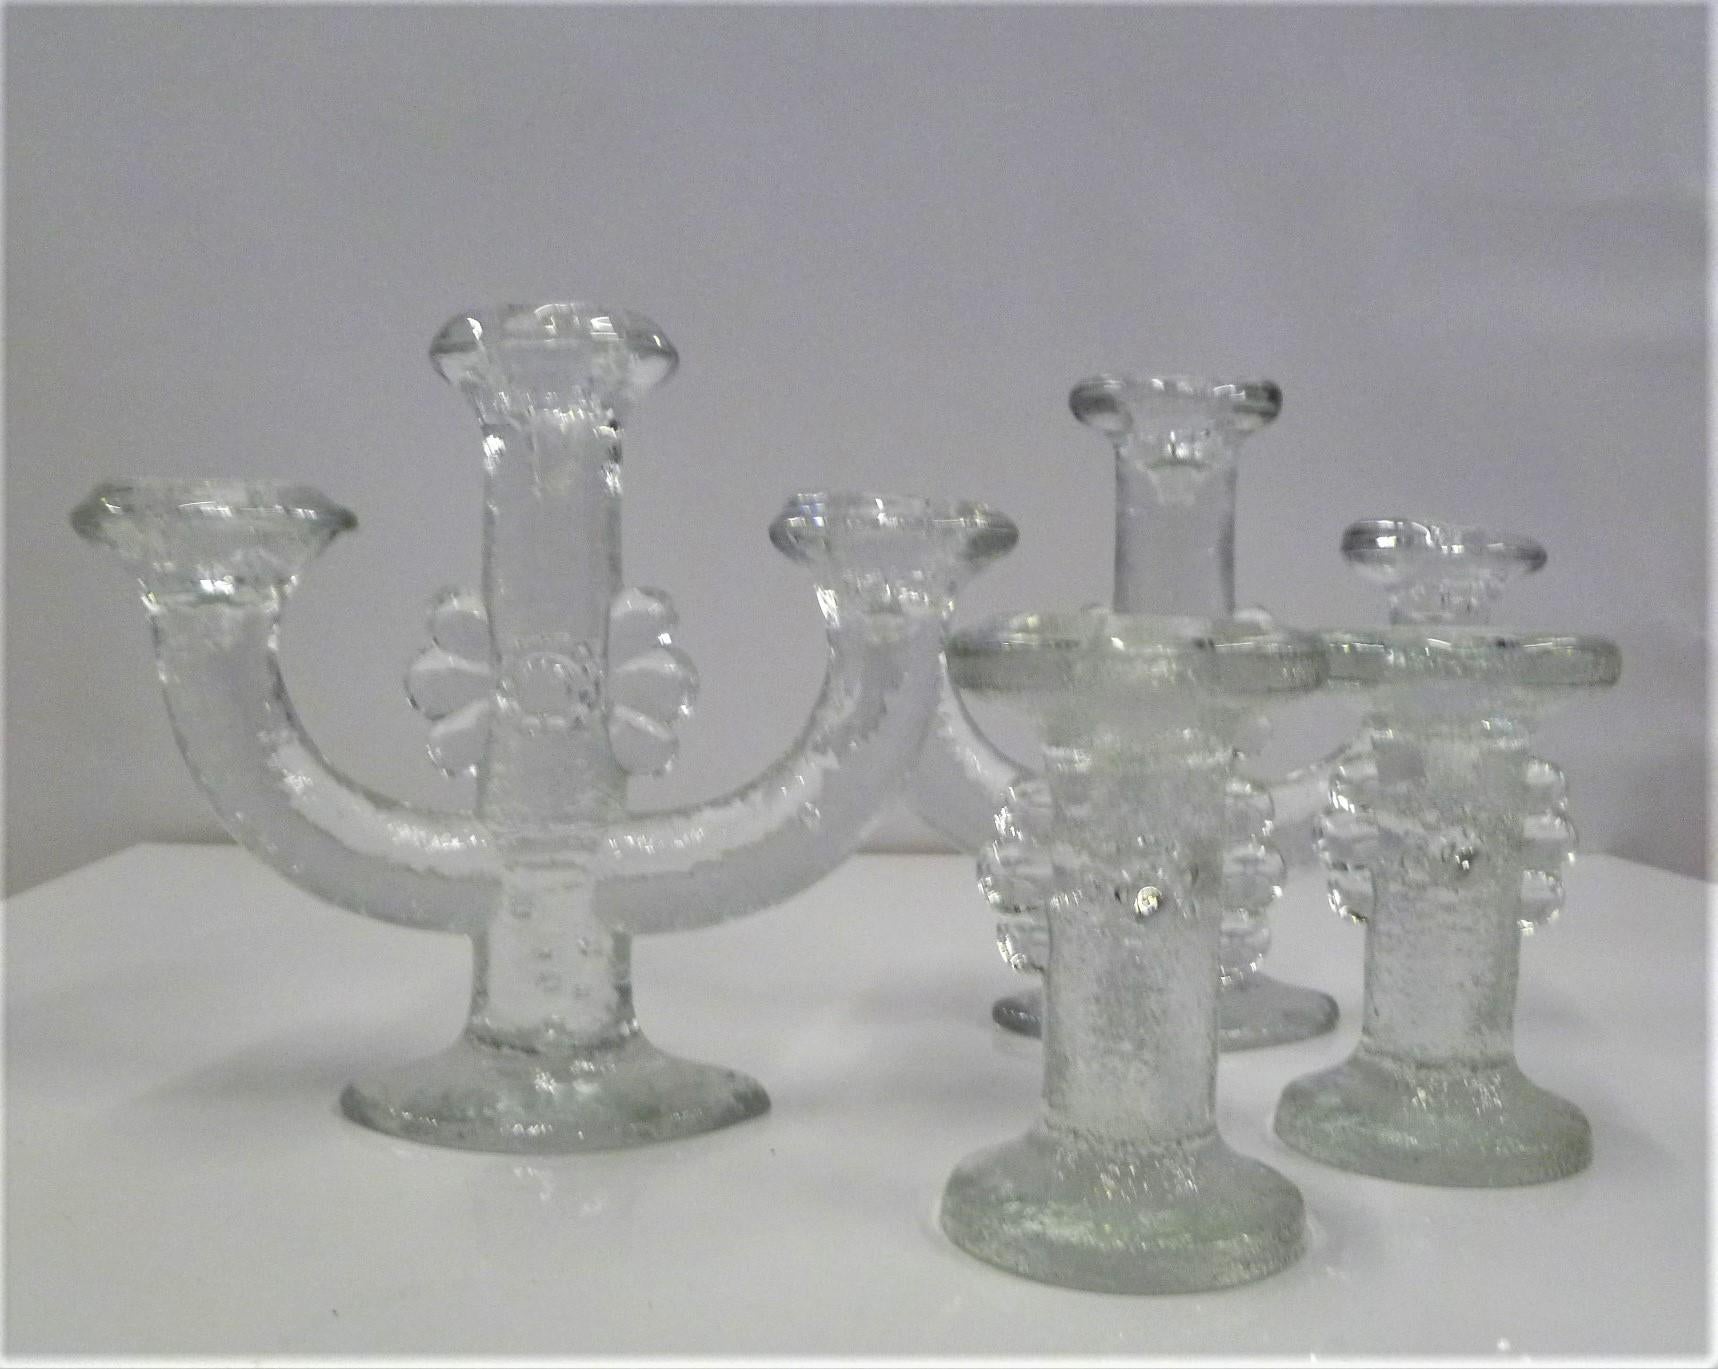 A grouping of 4 textured lead crystal glass candleholders from the 1970s by Swedish Designer Staffan Gellerstedt ( b. 1944) for Pukeberg Glassworks of Sweden. The set consists of heavily textured glass holders with an abstract flower motif, two